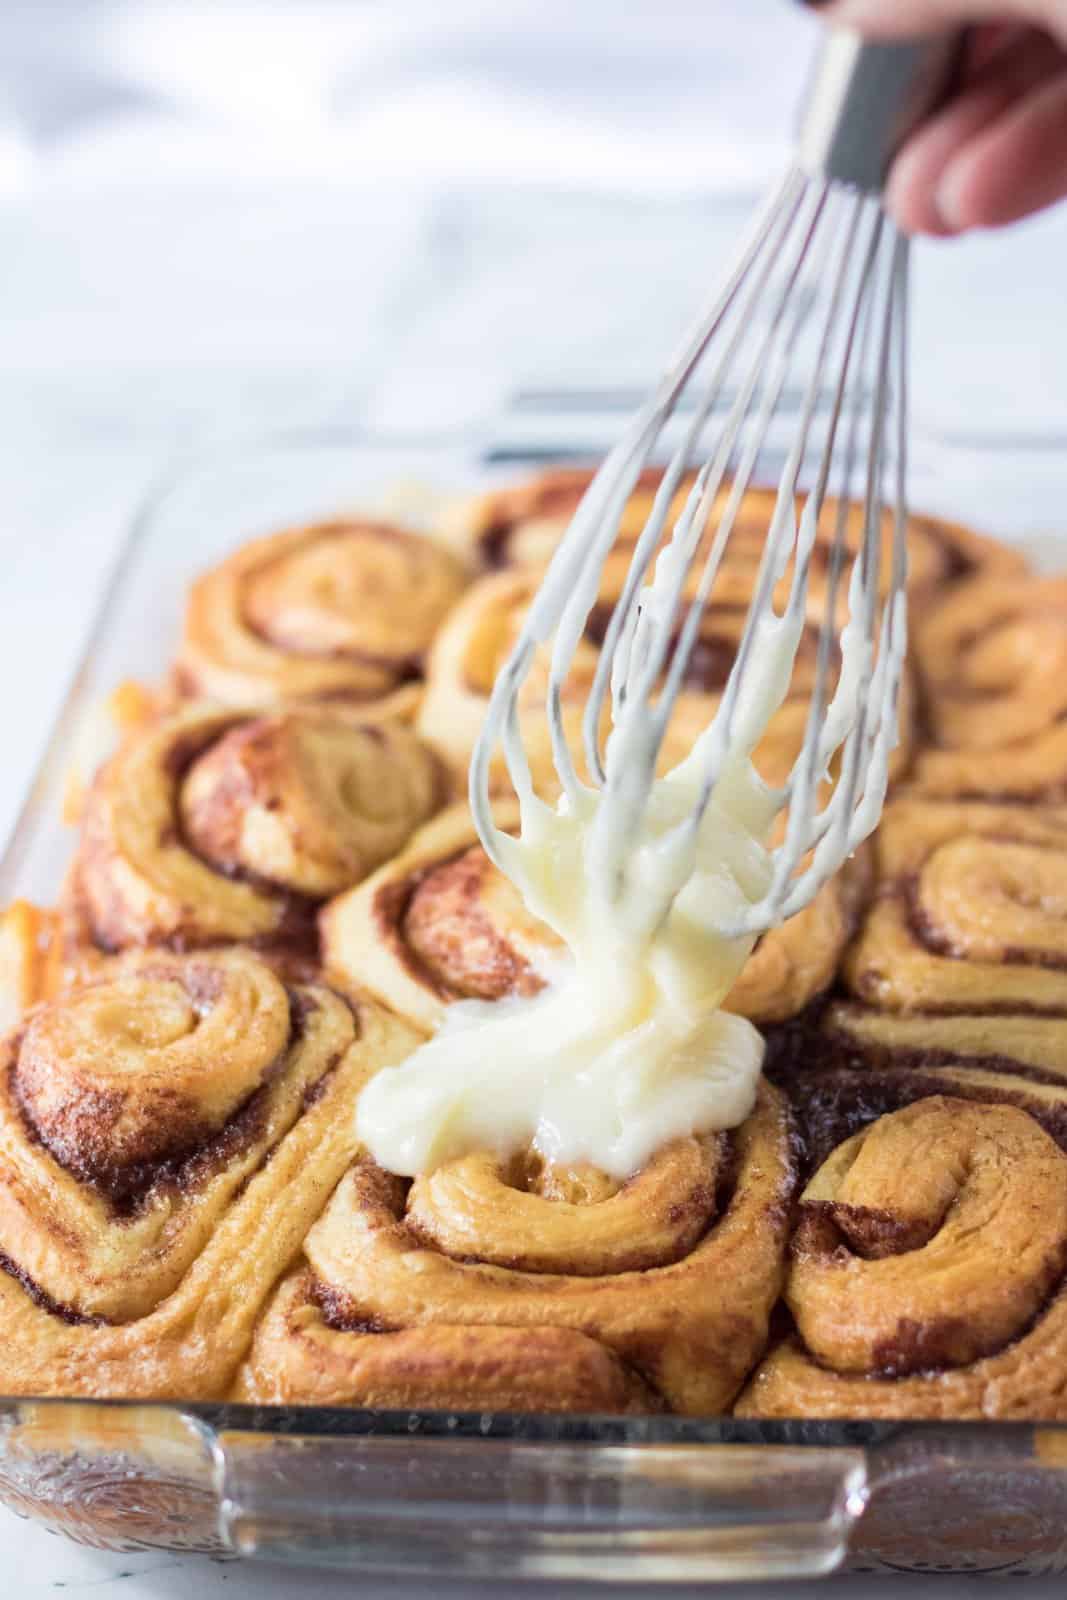 Icing being spread over baked cinnamon rolls.